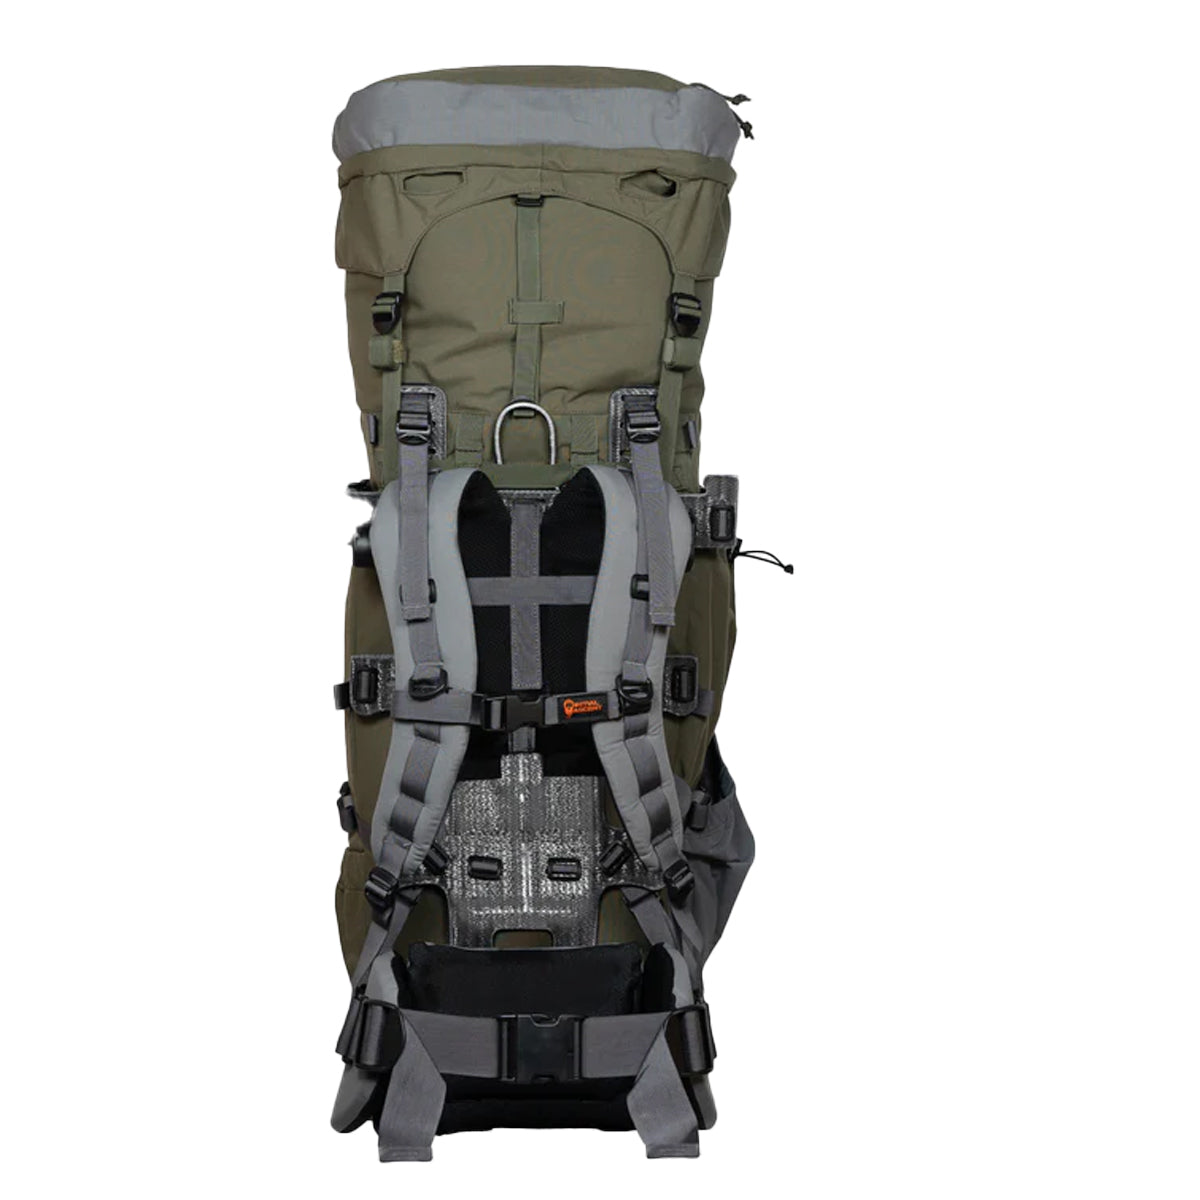 Initial Ascent 5K Backpack in  by GOHUNT | Initial Ascent - GOHUNT Shop